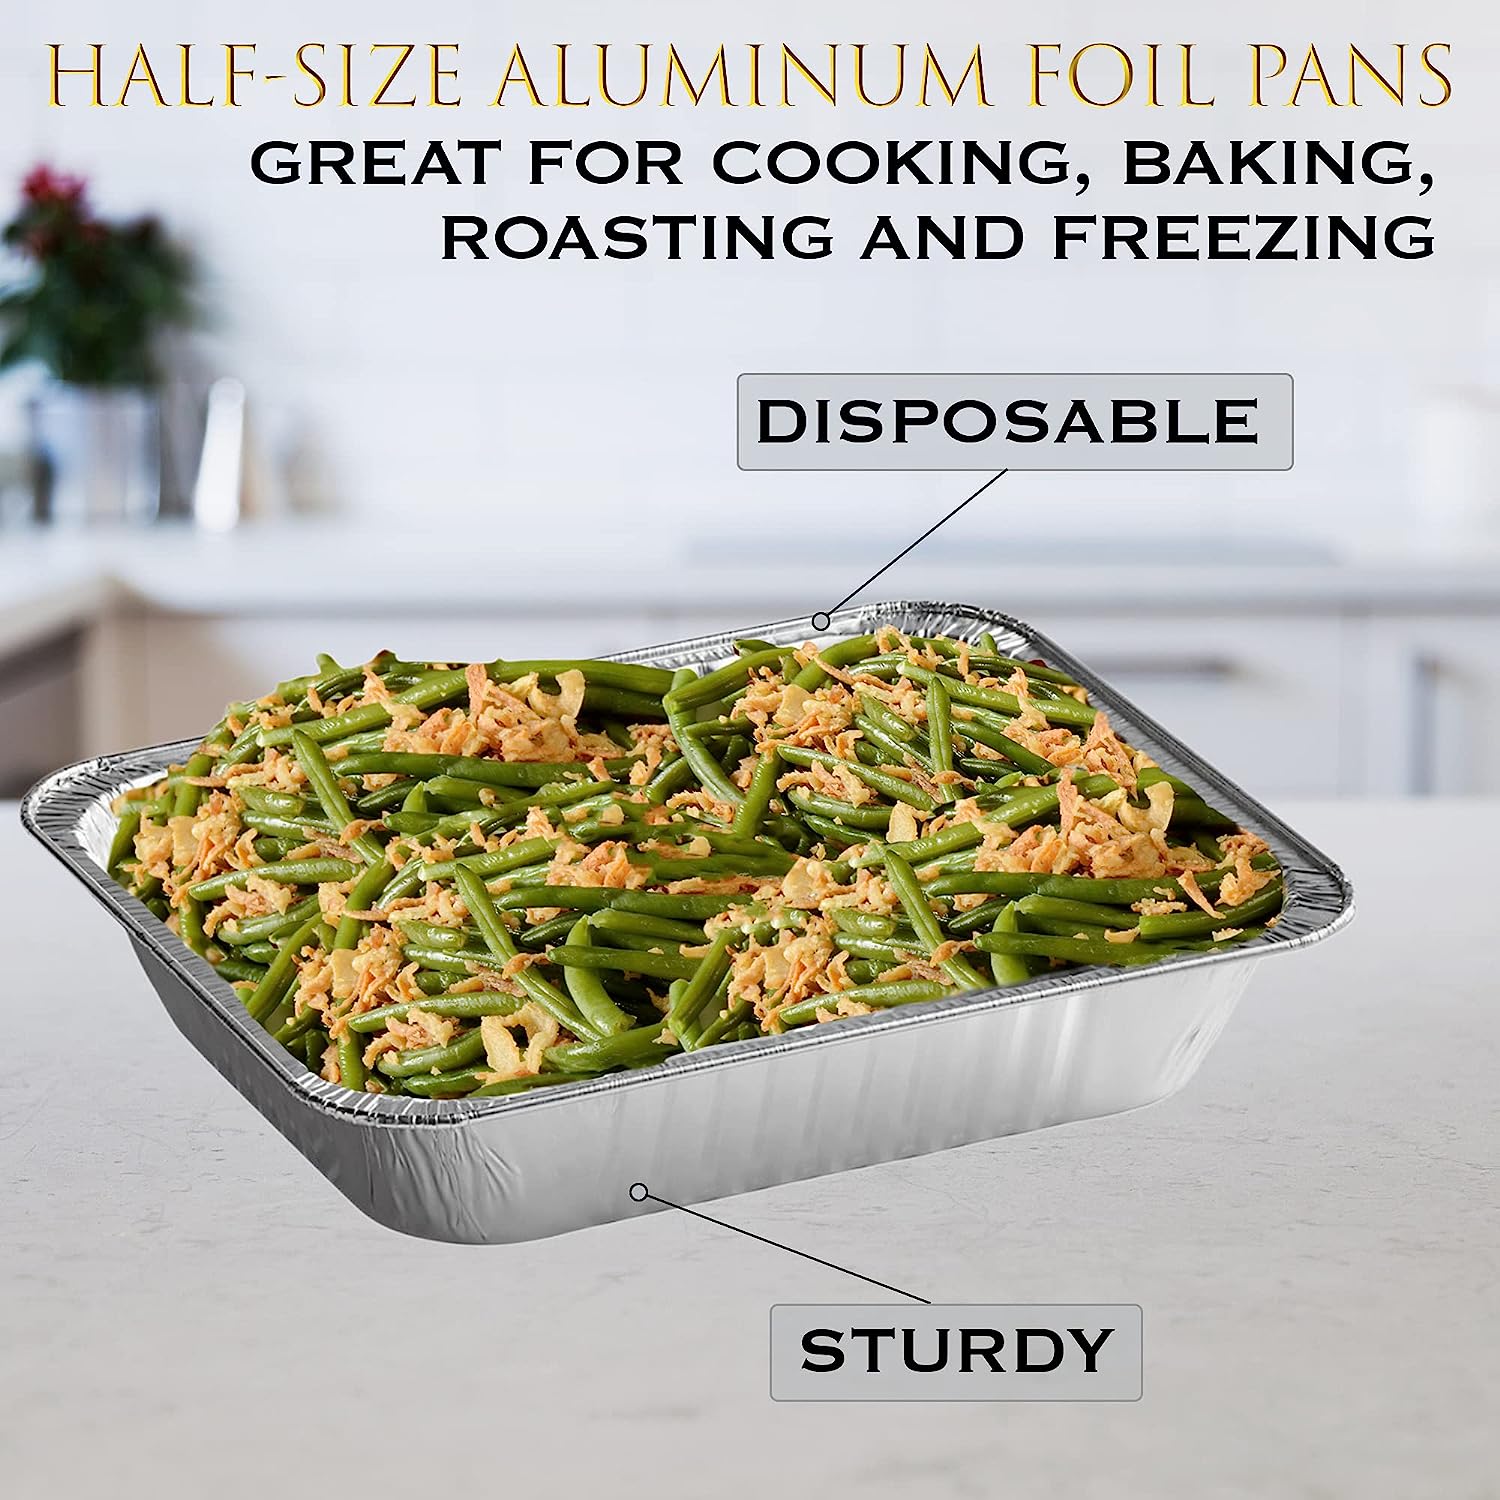 EHOMEA2Z Aluminum Pans Disposable Half Size USA Made (30 Pack) 9x13 Prepping, Roasting, Food, Storing, Heating, Cooking, Chafers, Catering, Crawfish Trays